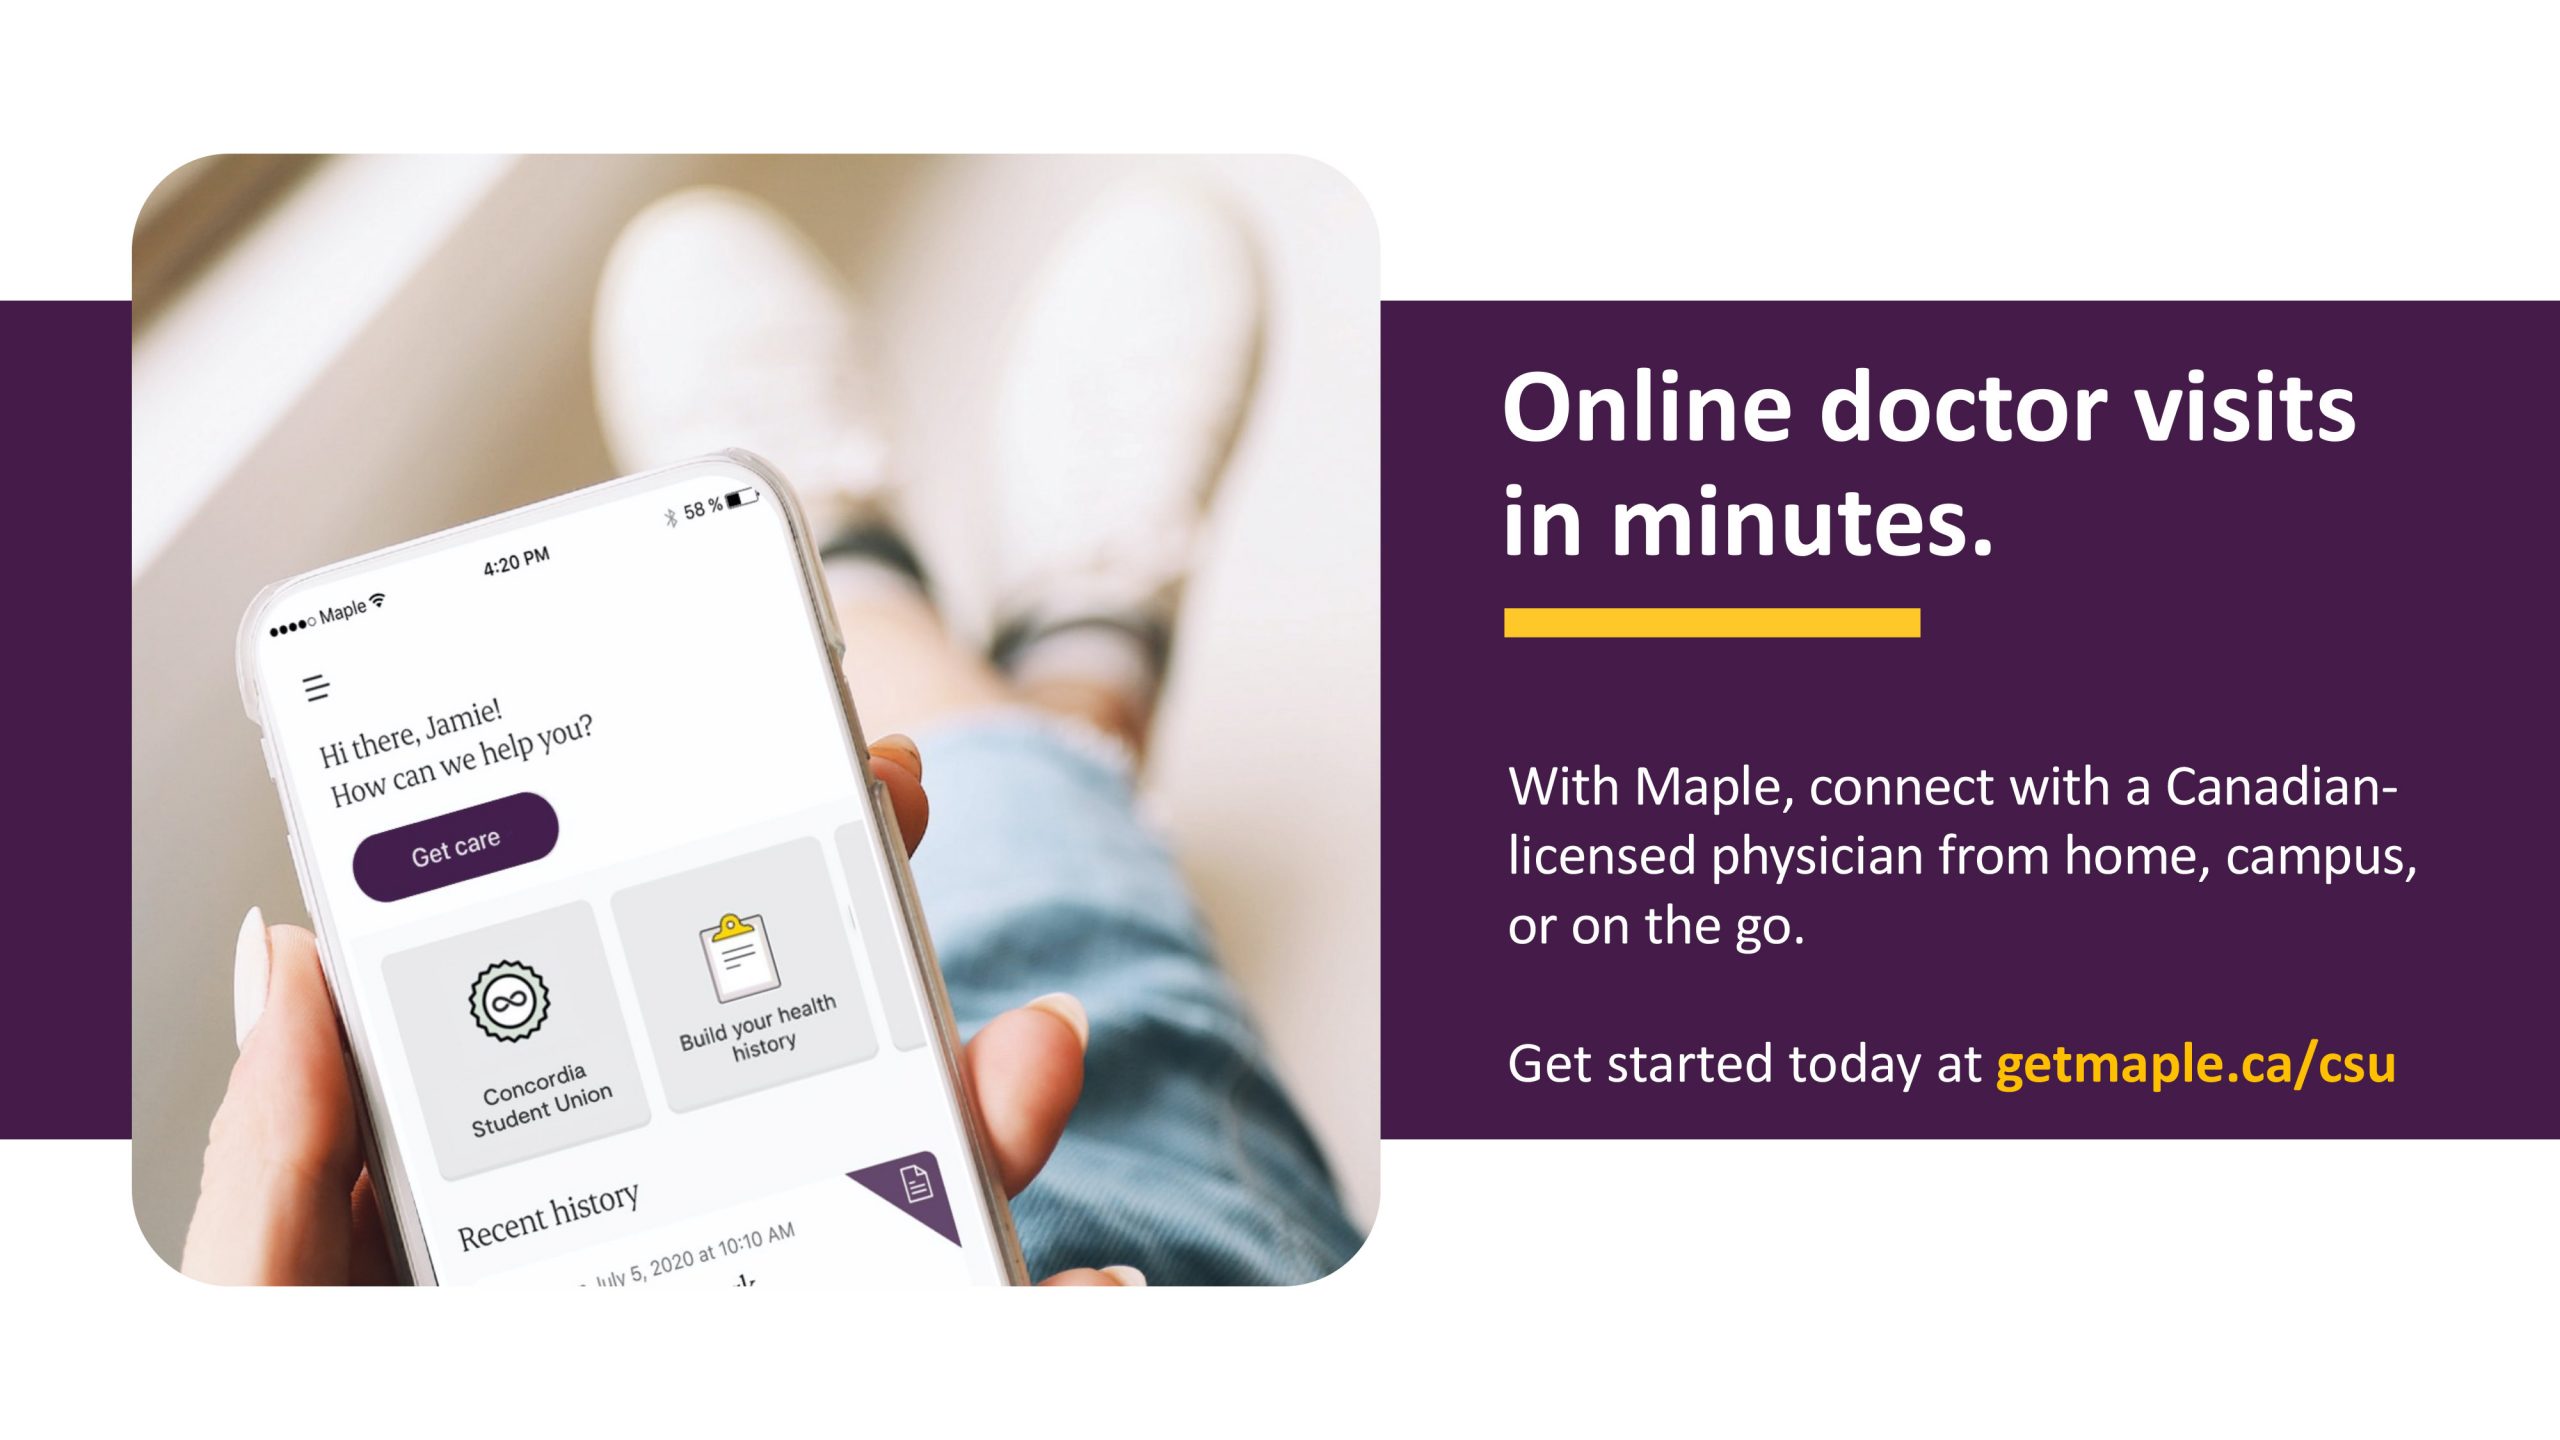 Online doctor visits in minutes. With maple, connect with a Canadian-licensed physician from home, campus, or on the go. Get started today at getmaple.ca/csu